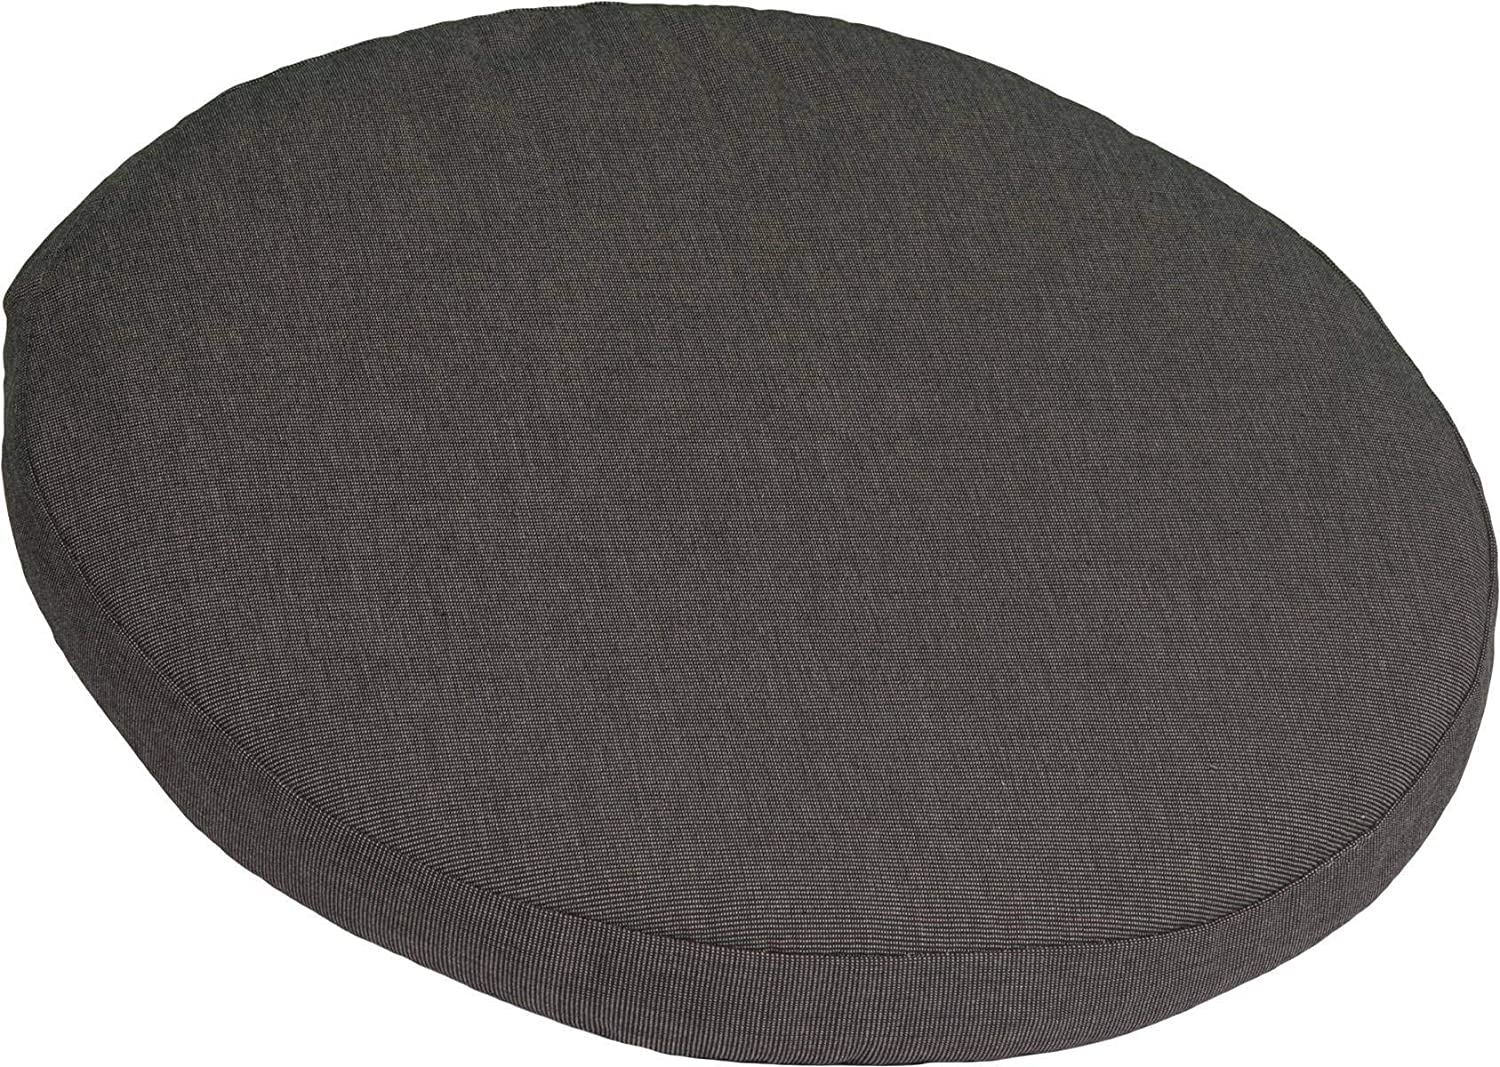 Chair Cushion Balcony Cushion Anthracite Dralon Cover 40 cm Round with Zip